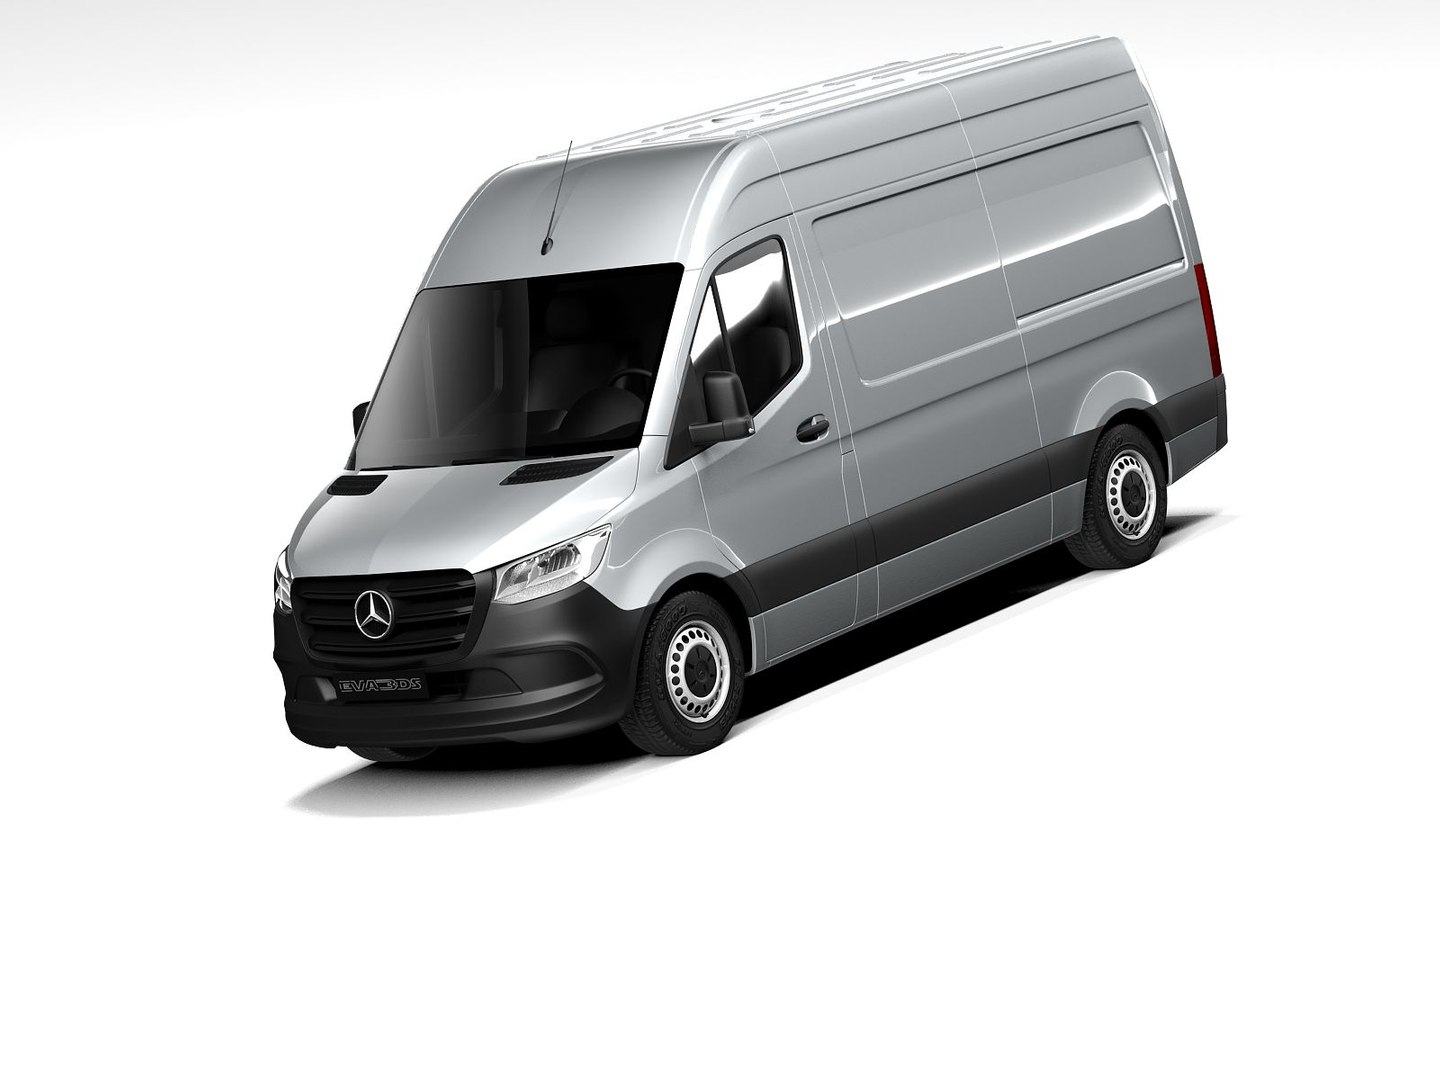 New MercedesBenz Sprinter Transfer Minibus 2020 pricing and spec detailed  Toyota HiAce Commuter rival scores added gear  Car News  CarsGuide